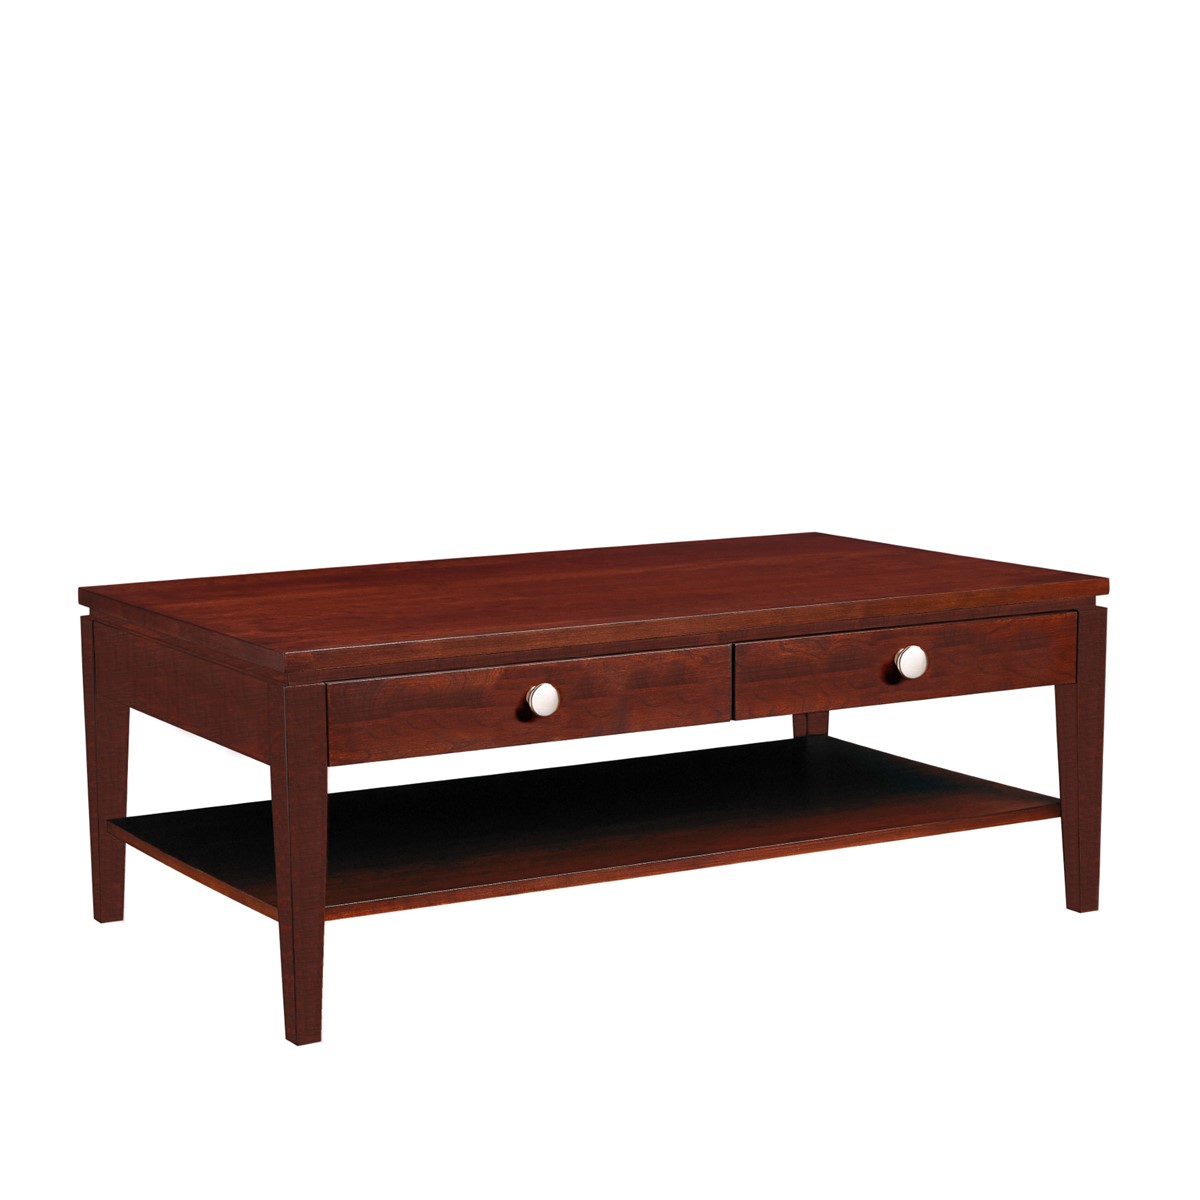 Urban Expressions: Rectangular Coffee Table with Drawer & Shelf